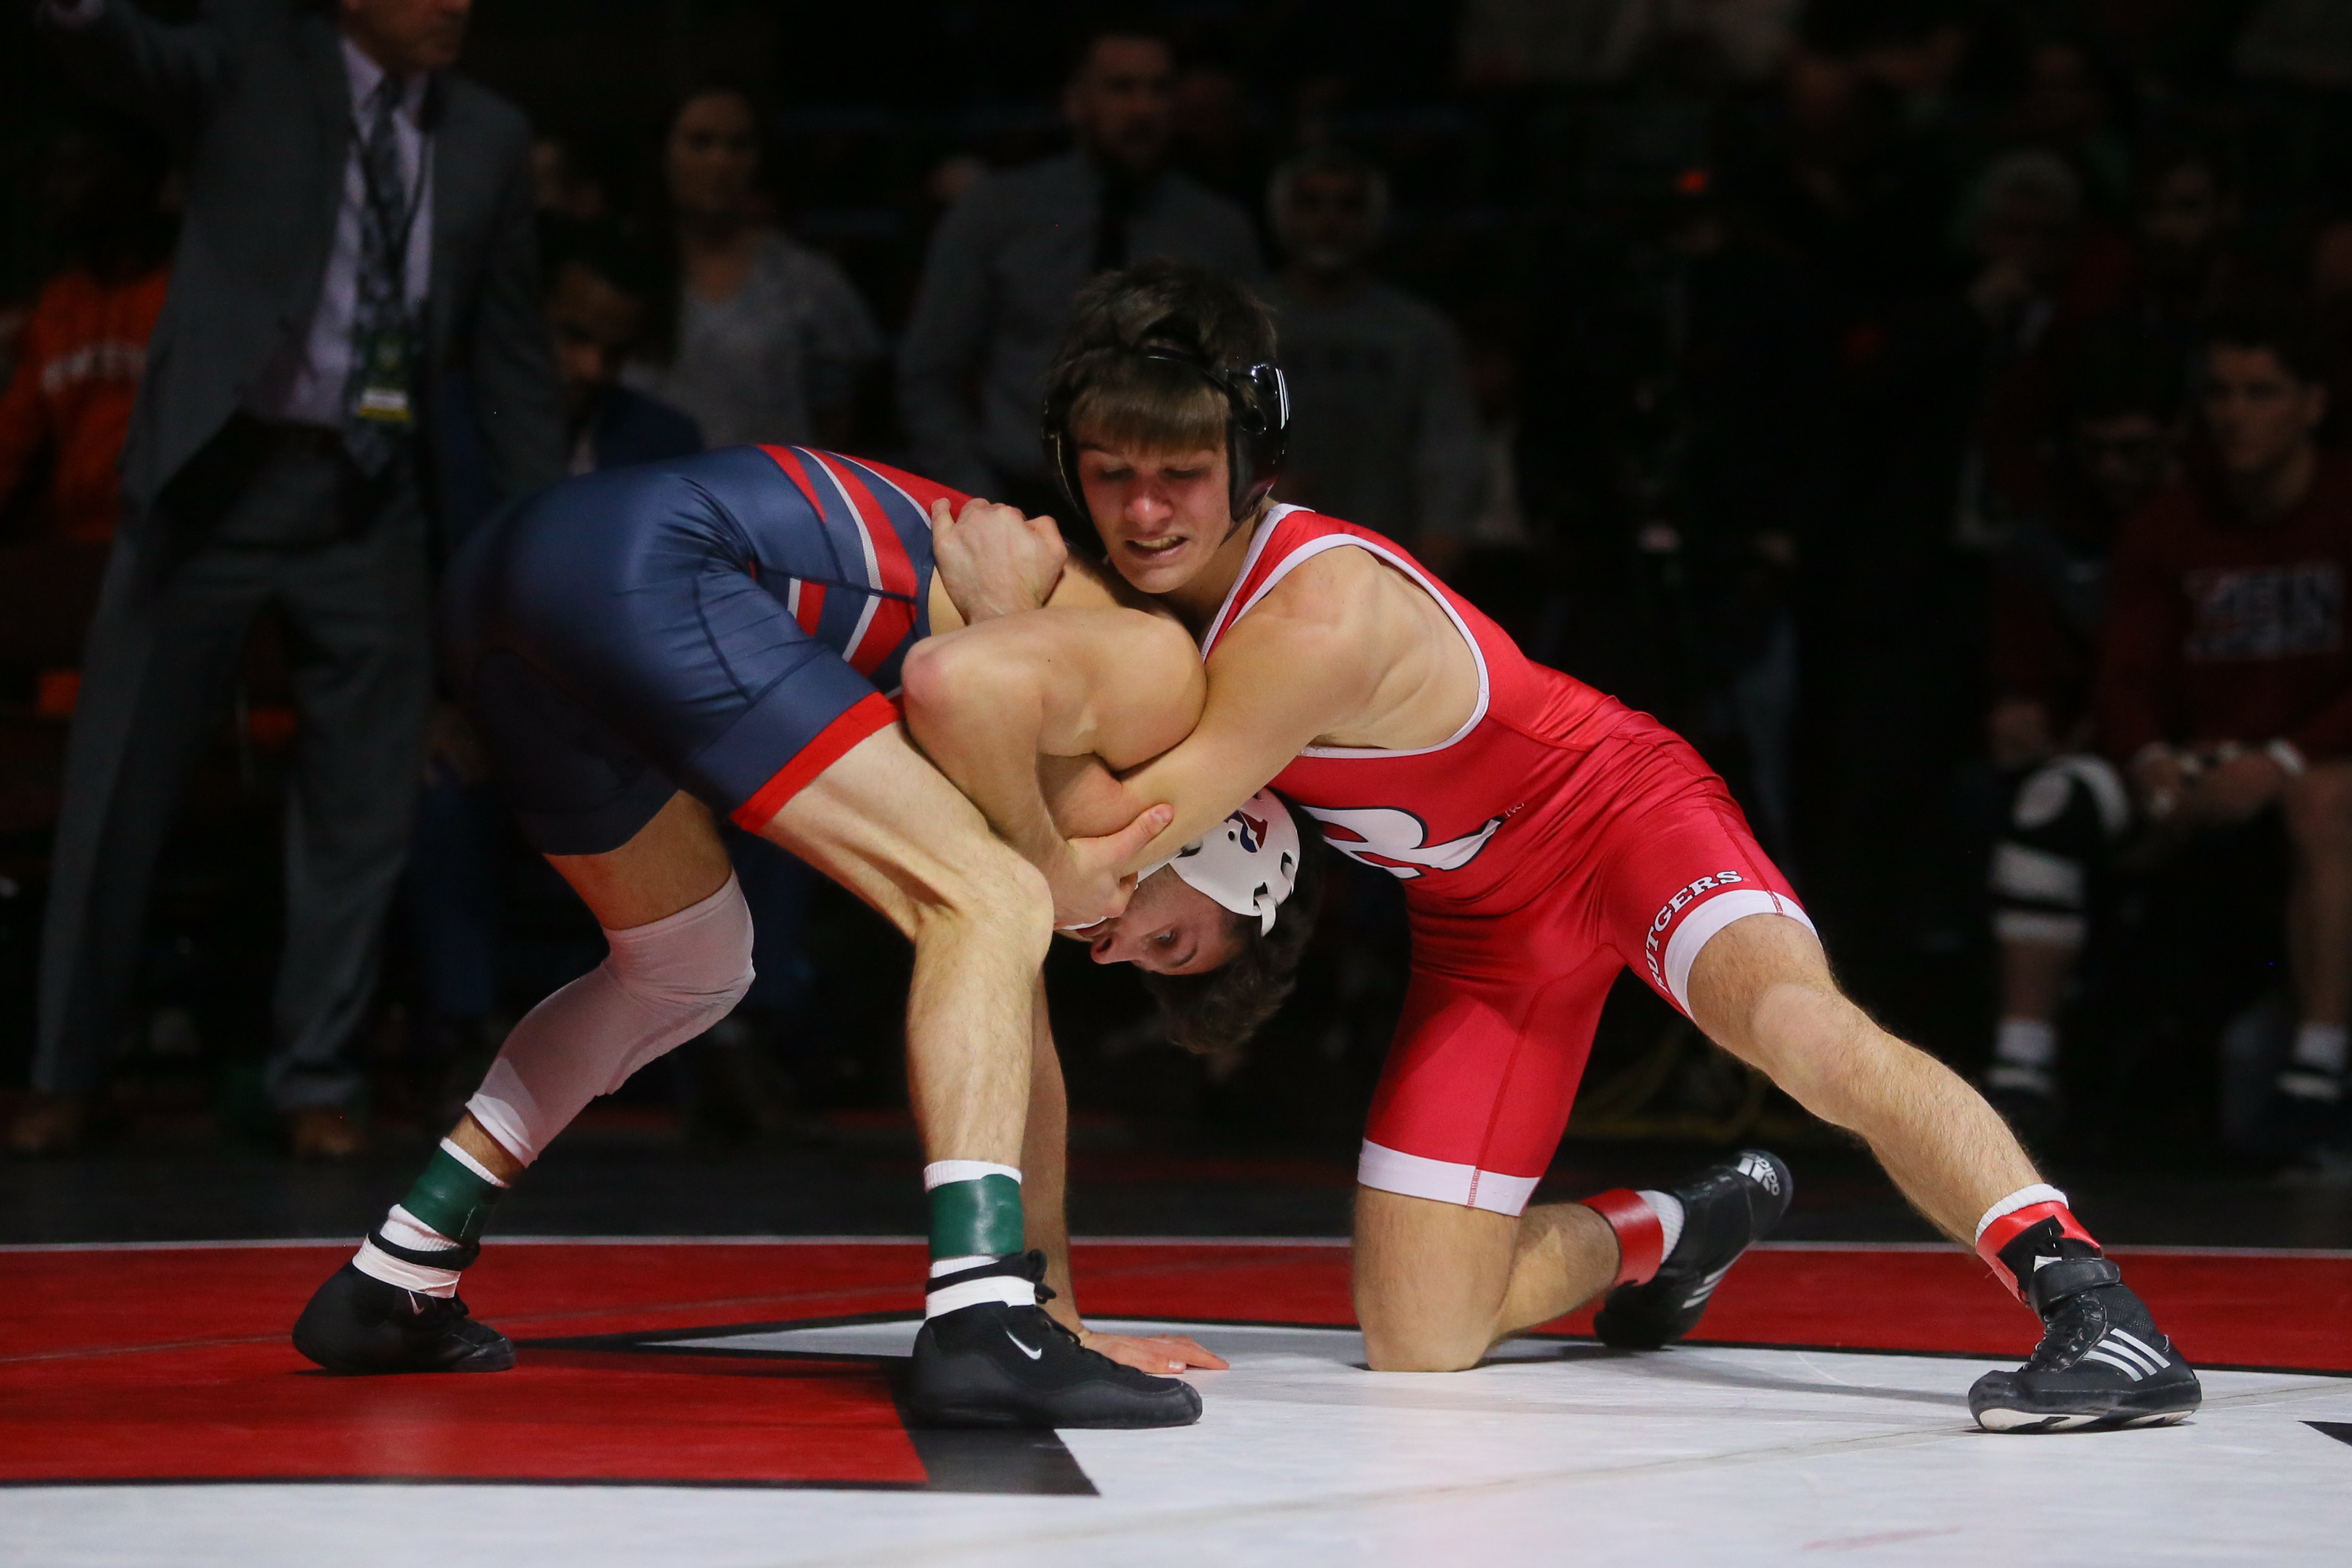 Wrestling photos at Prudential Center